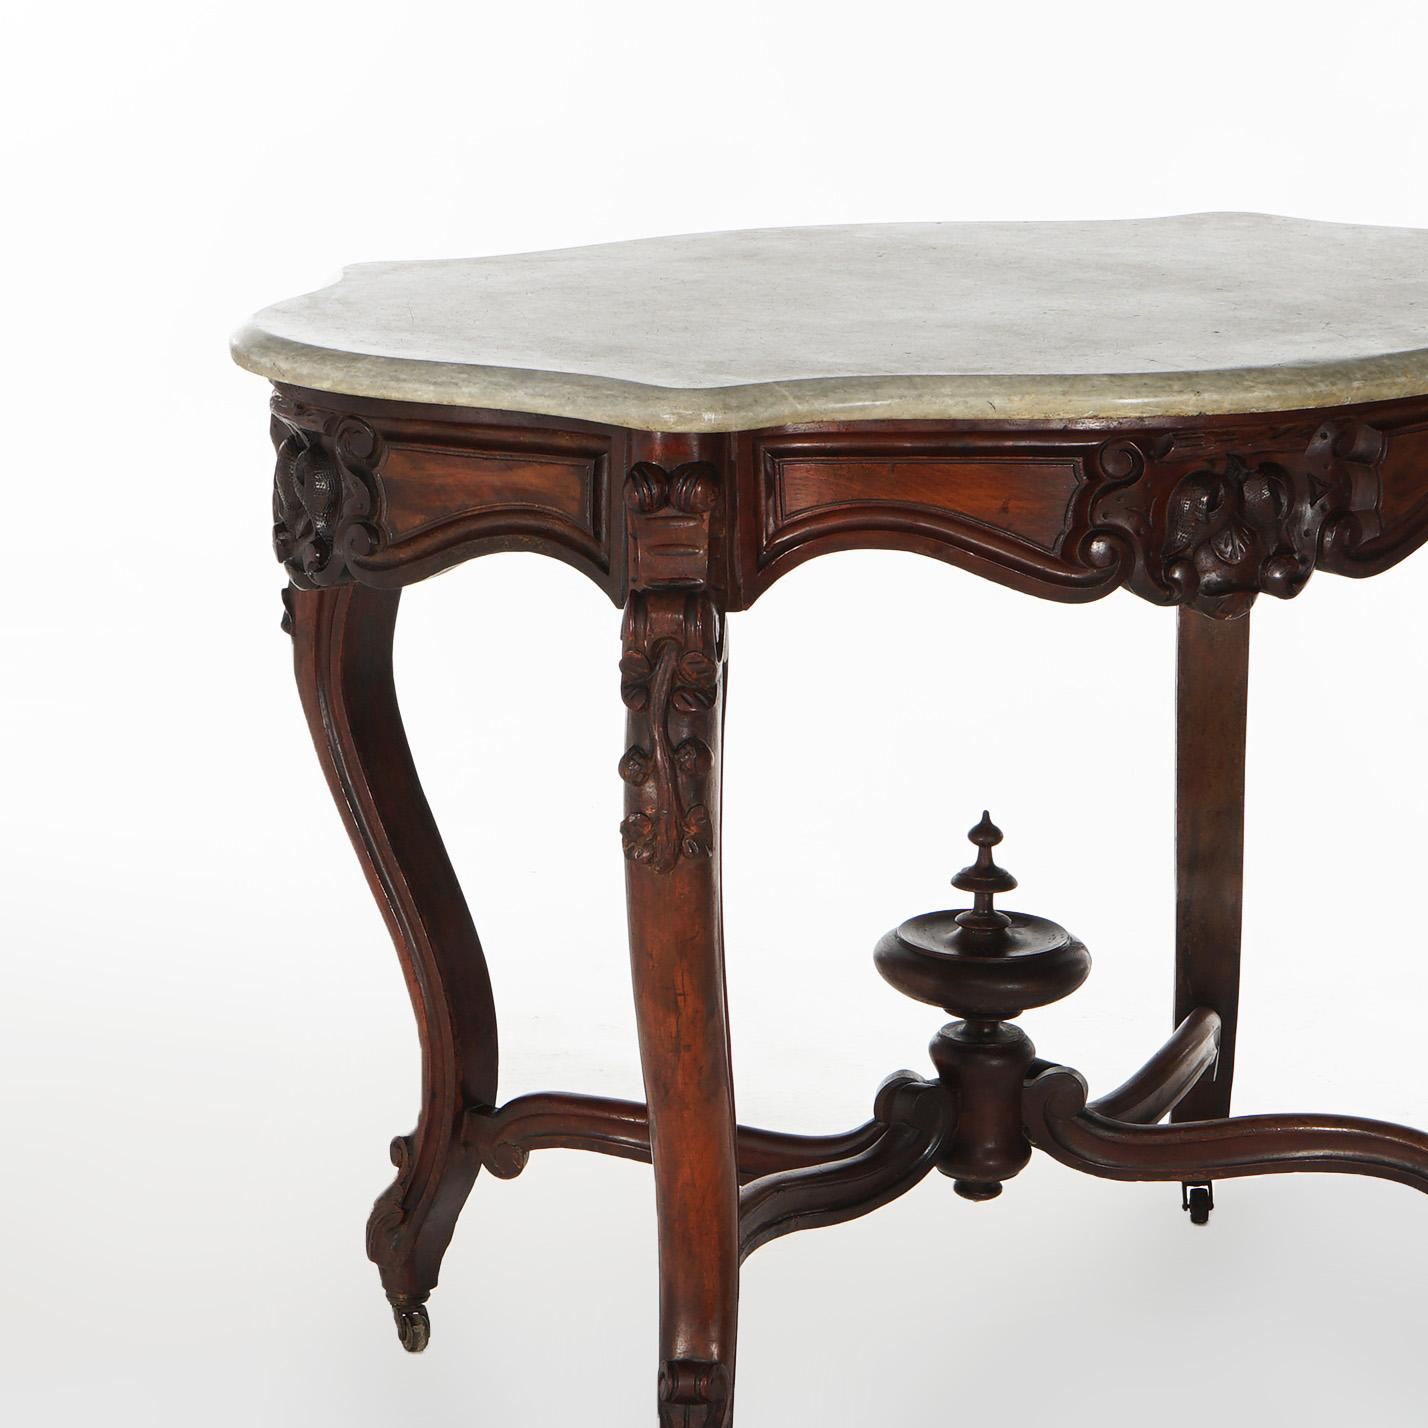 Antique Victorian Rococo Carved Walnut & Marble Top Parlor Table C1800 In Good Condition For Sale In Big Flats, NY